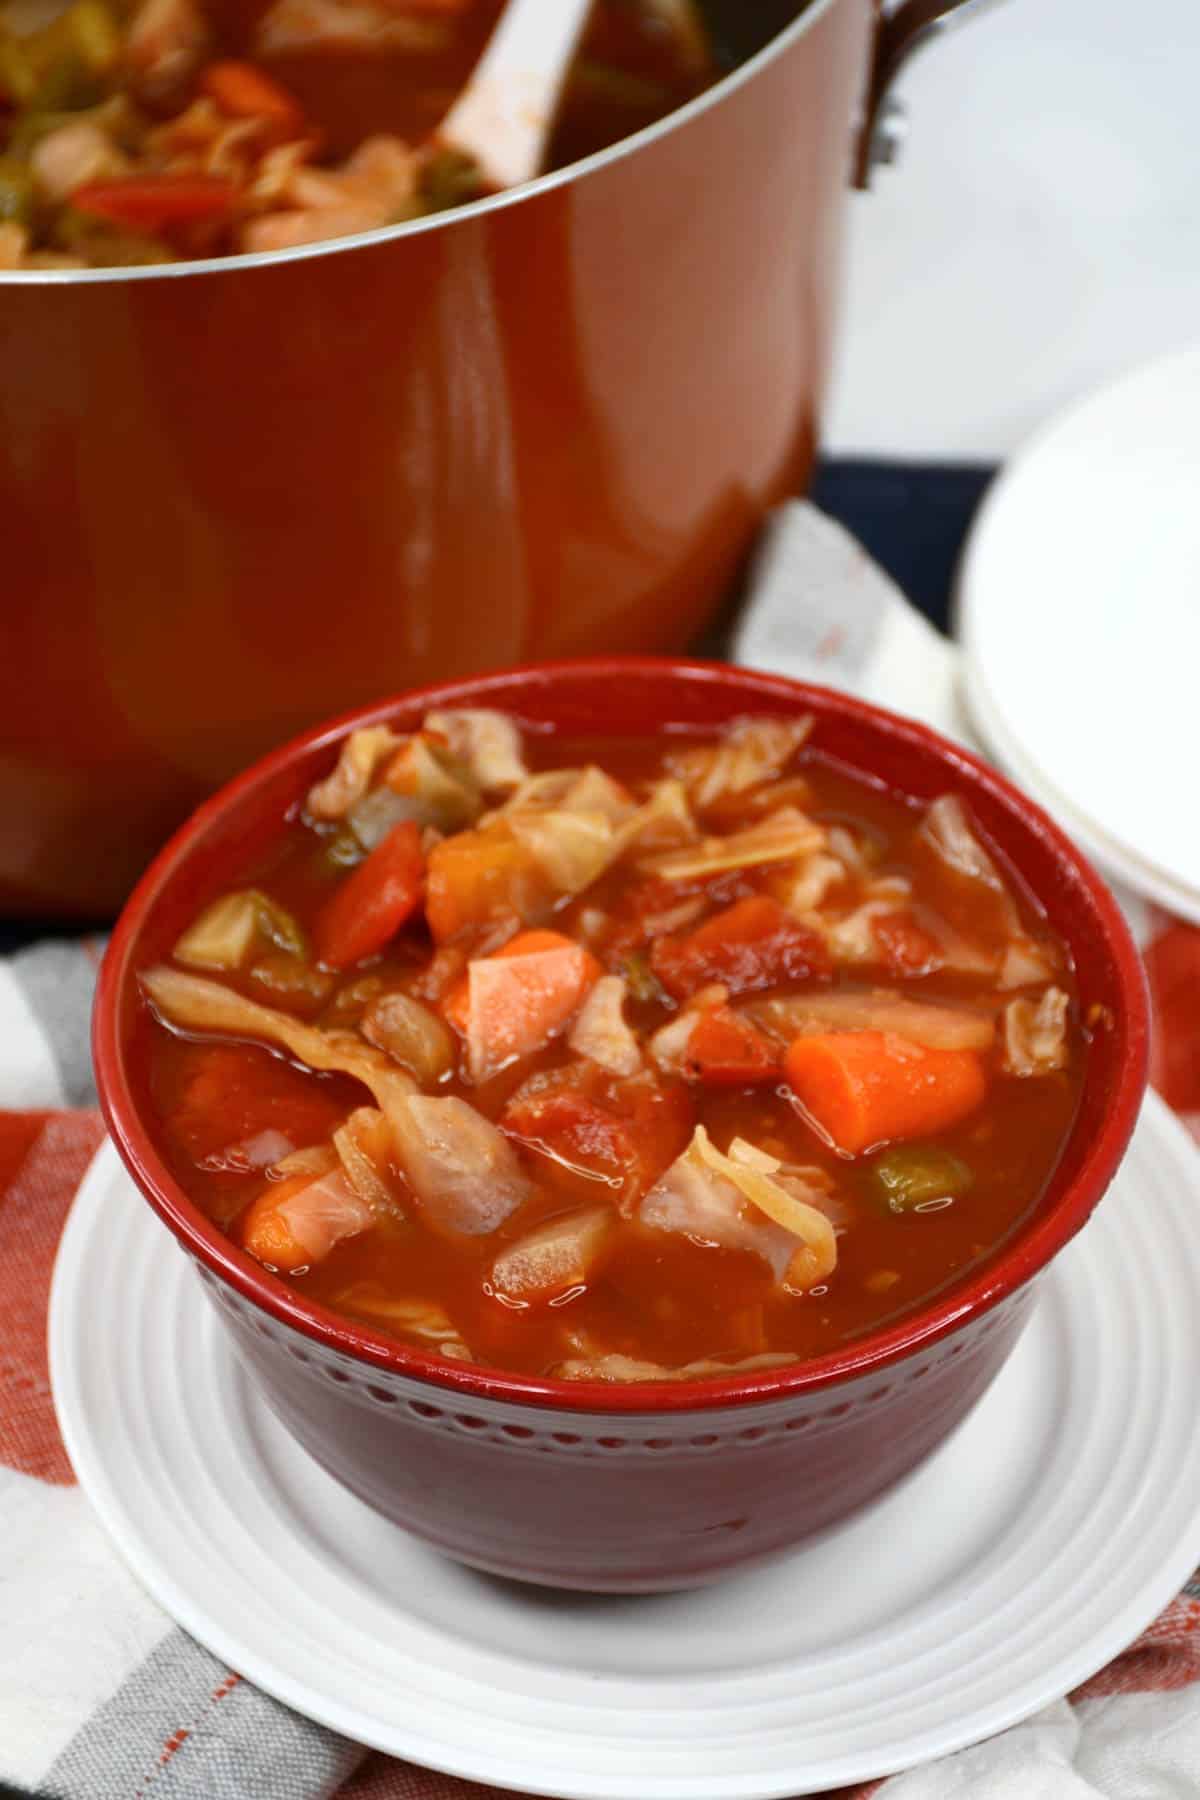 Fat Burning Cabbage Soup